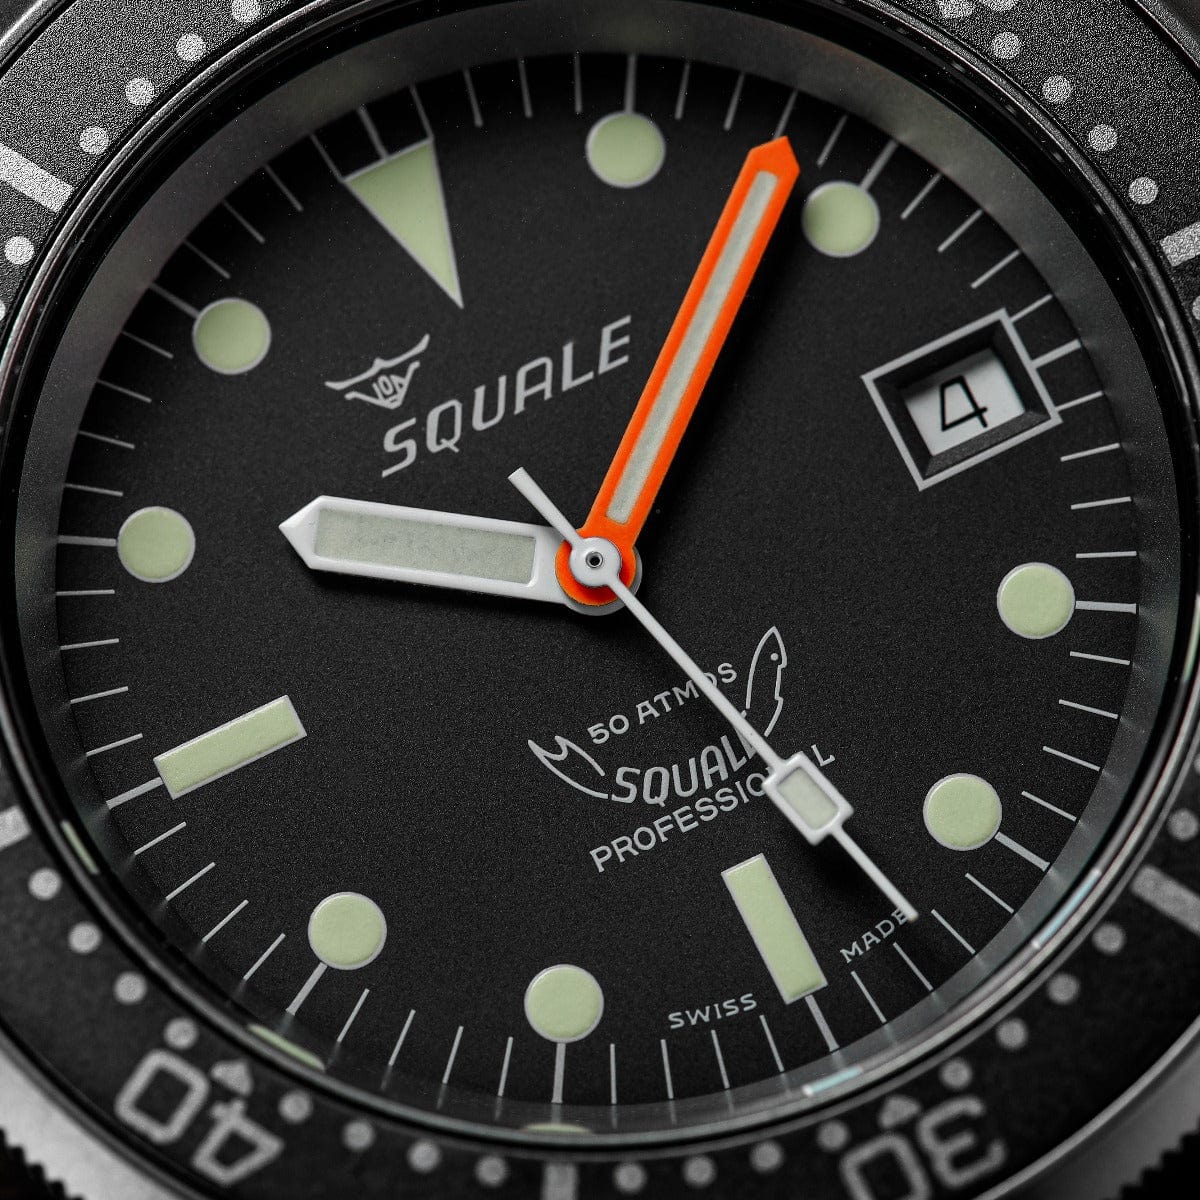 Squale 1521 Swiss Made Diver's Watch - Black With Blasted Case